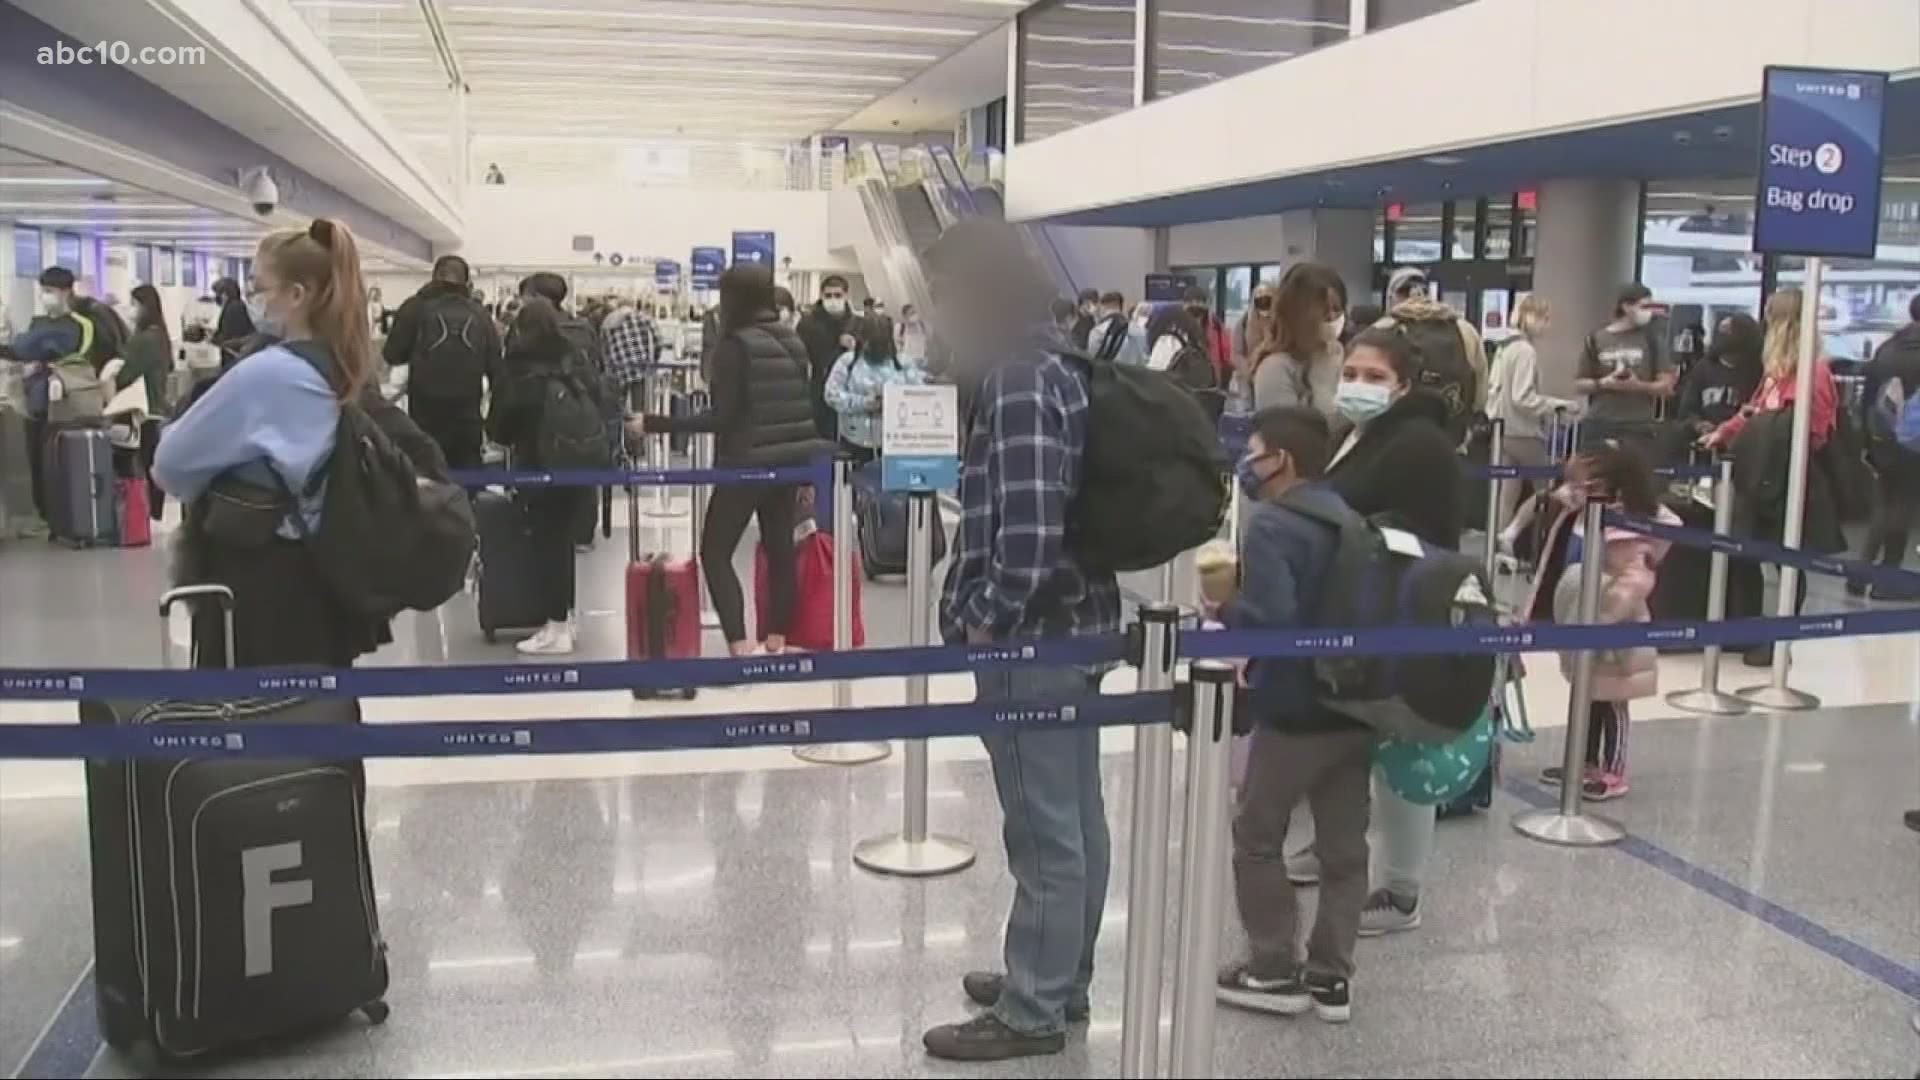 As restrictions loosen and people travel more, risks of COVID-19 are going up. Doctors say to stay vigilant and don't ignore COVID-19 precautions.